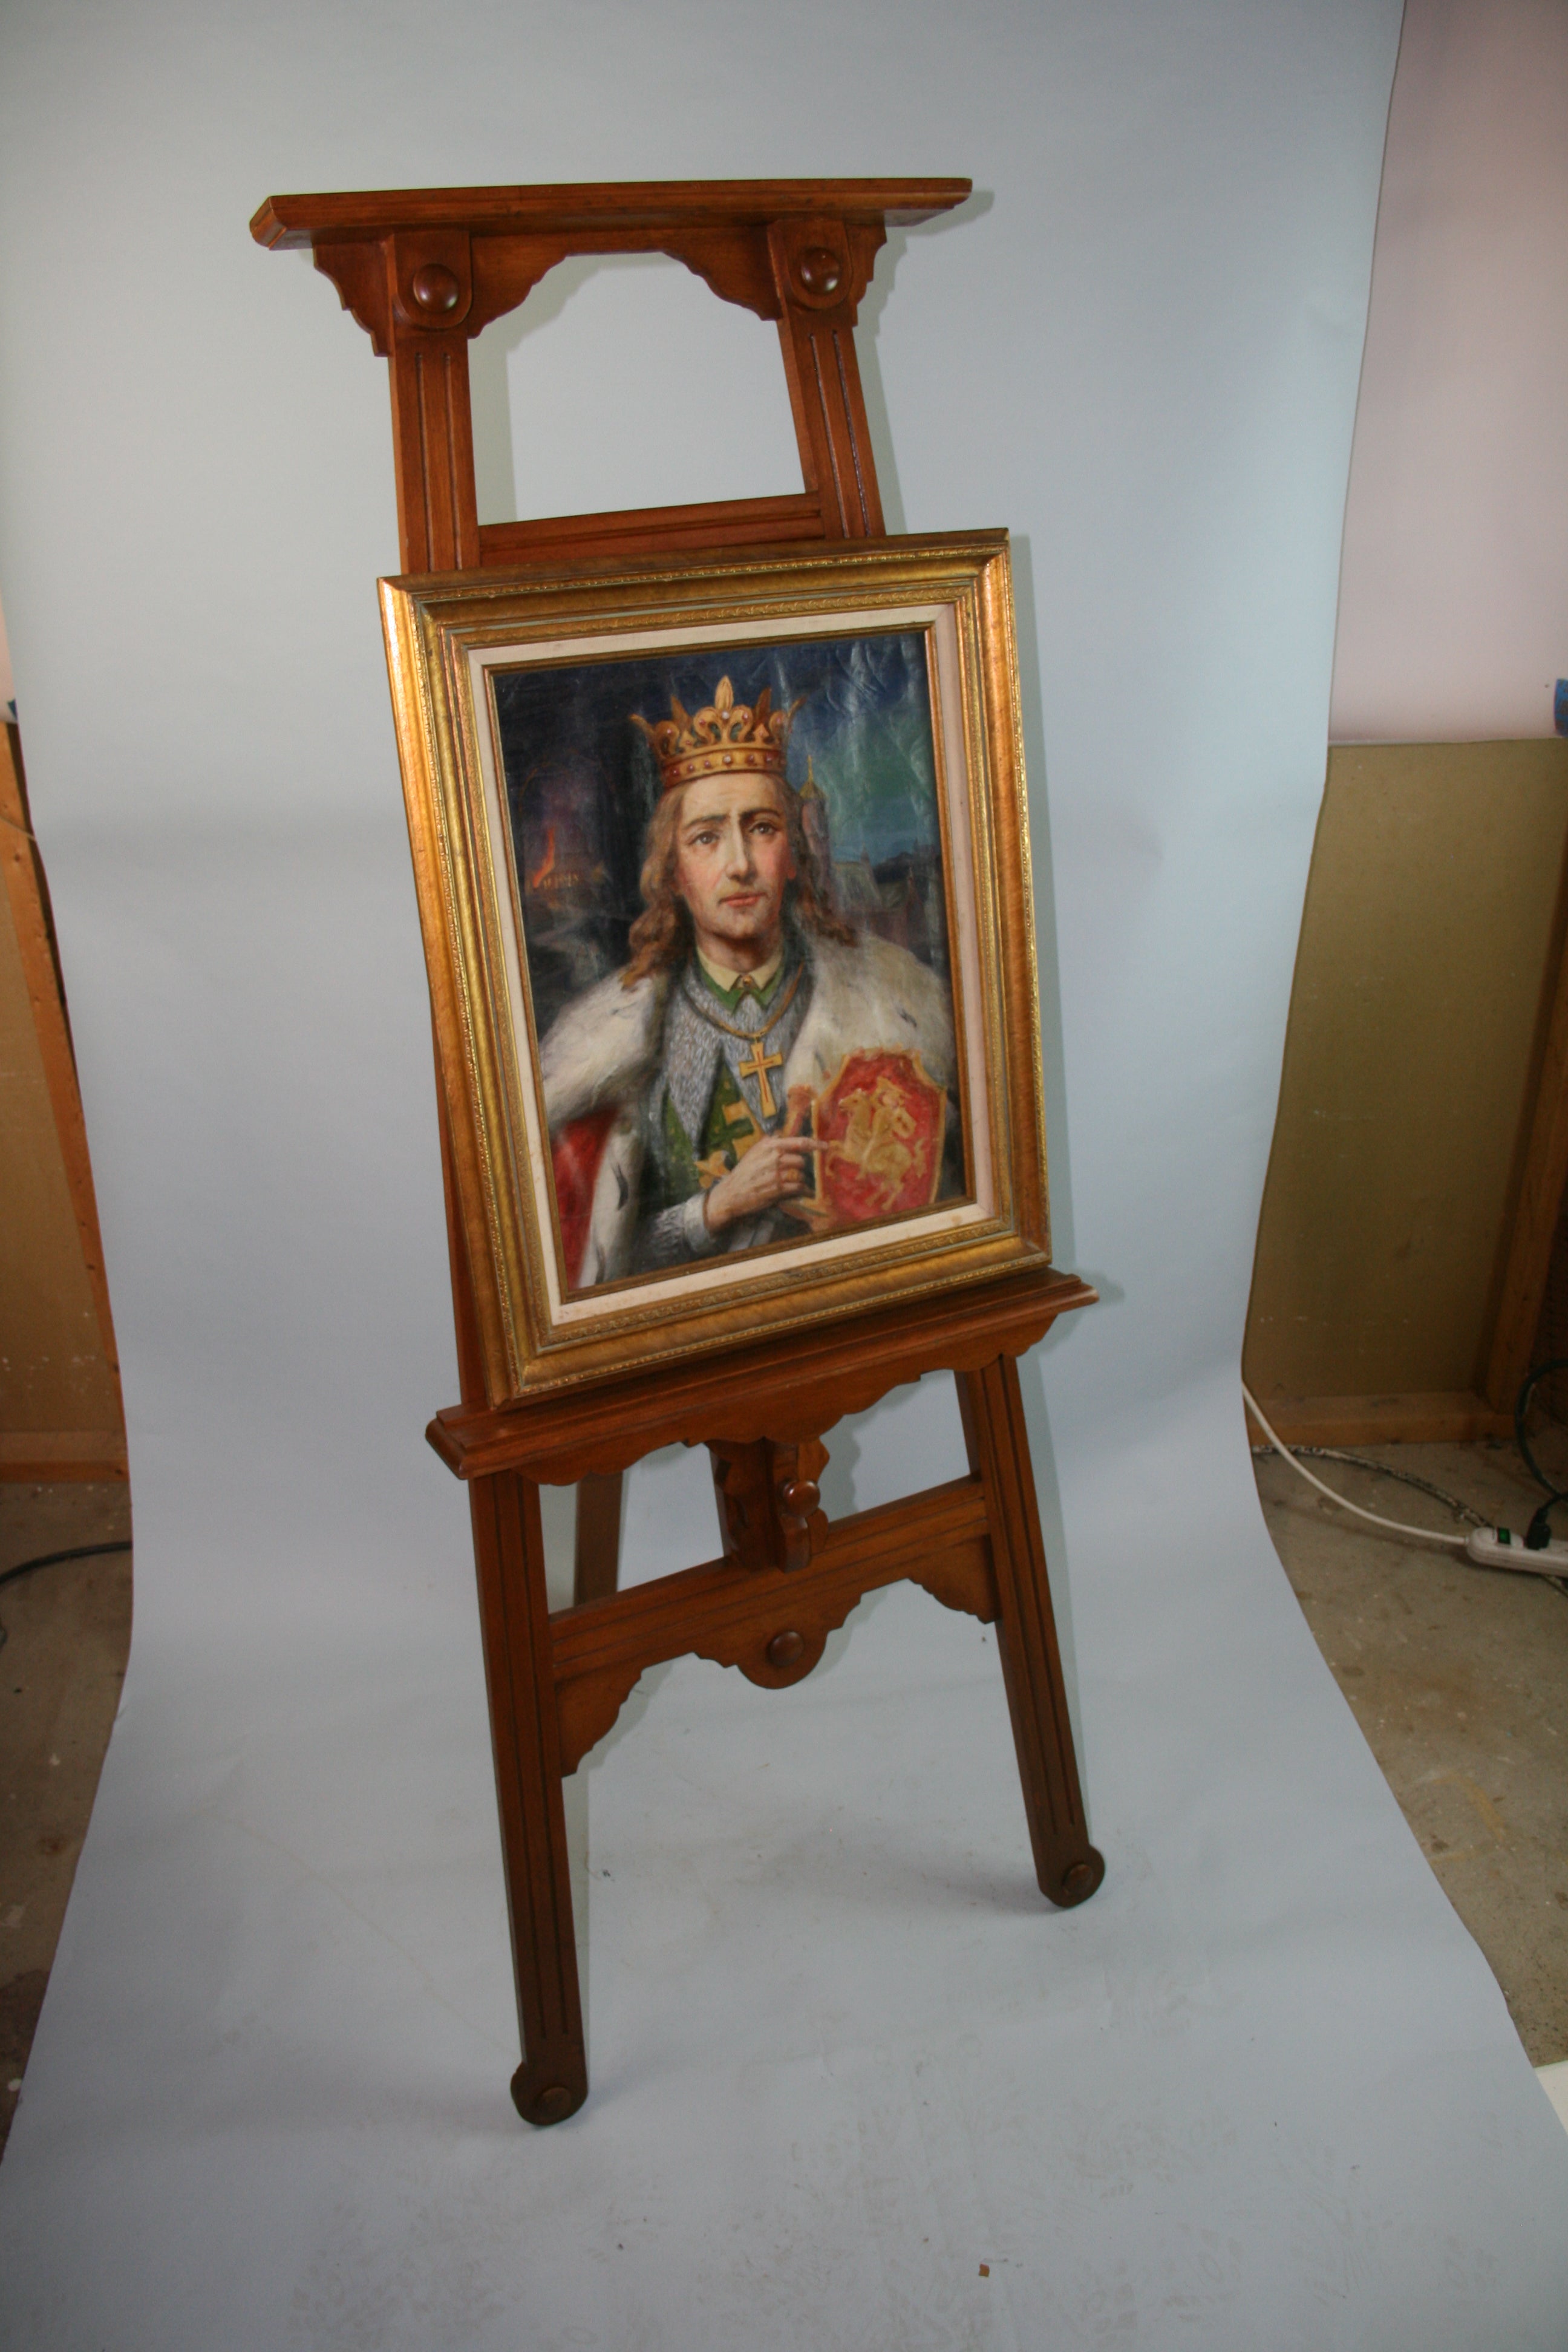 1279 Floor easel artist display stand practical in size, good condition, beautifully
designed and great quality materials picture stand.
Height is easily adjusted with circular wood handle in front.
Painting is not included.